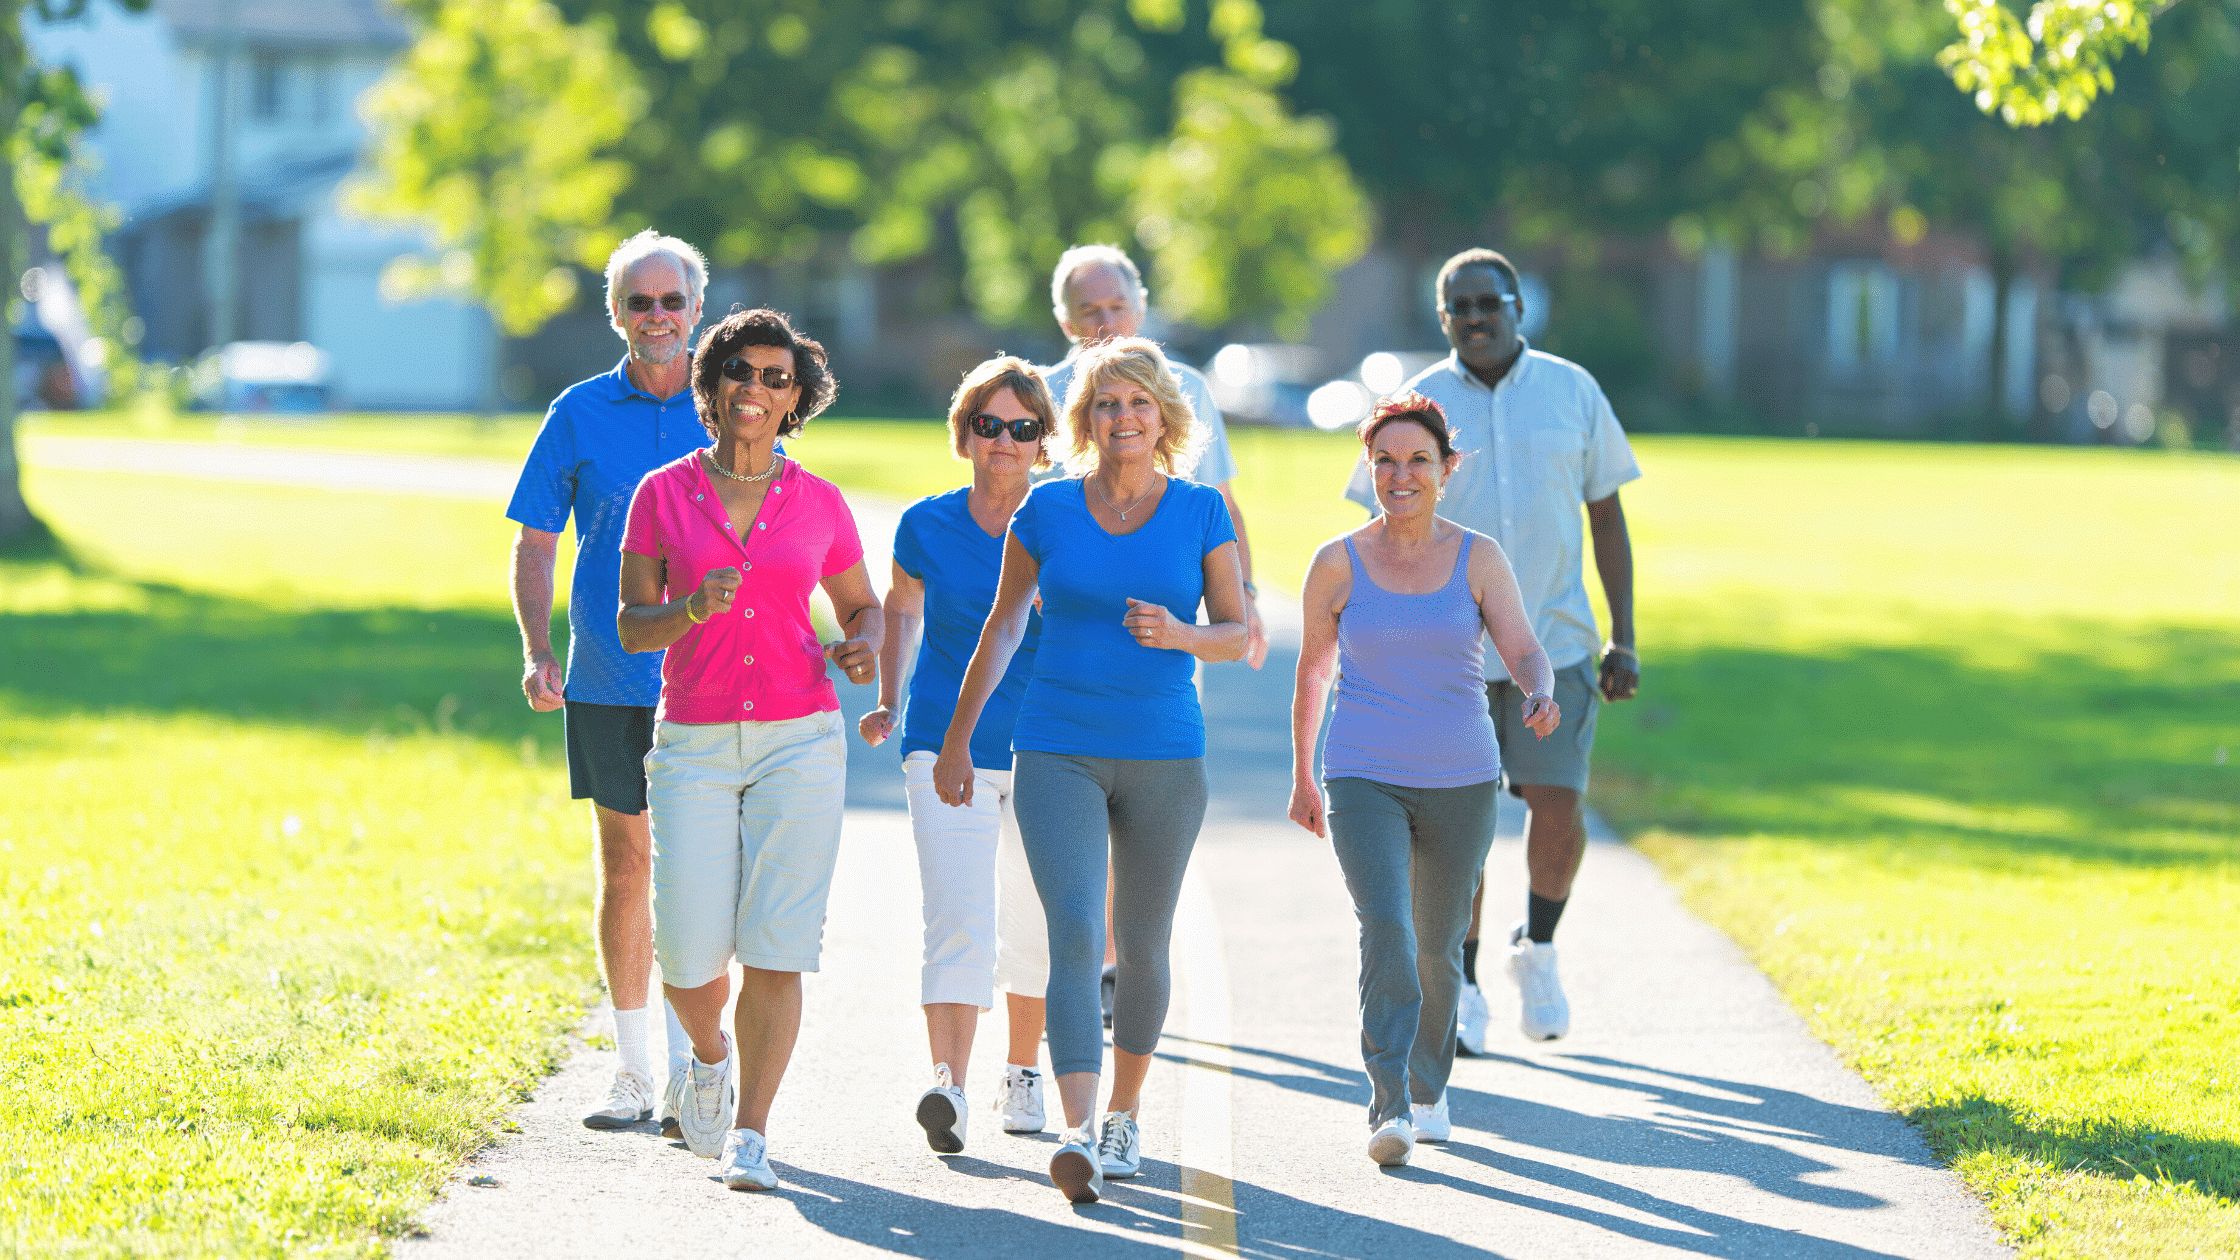 Group of Active aging seniors walking together